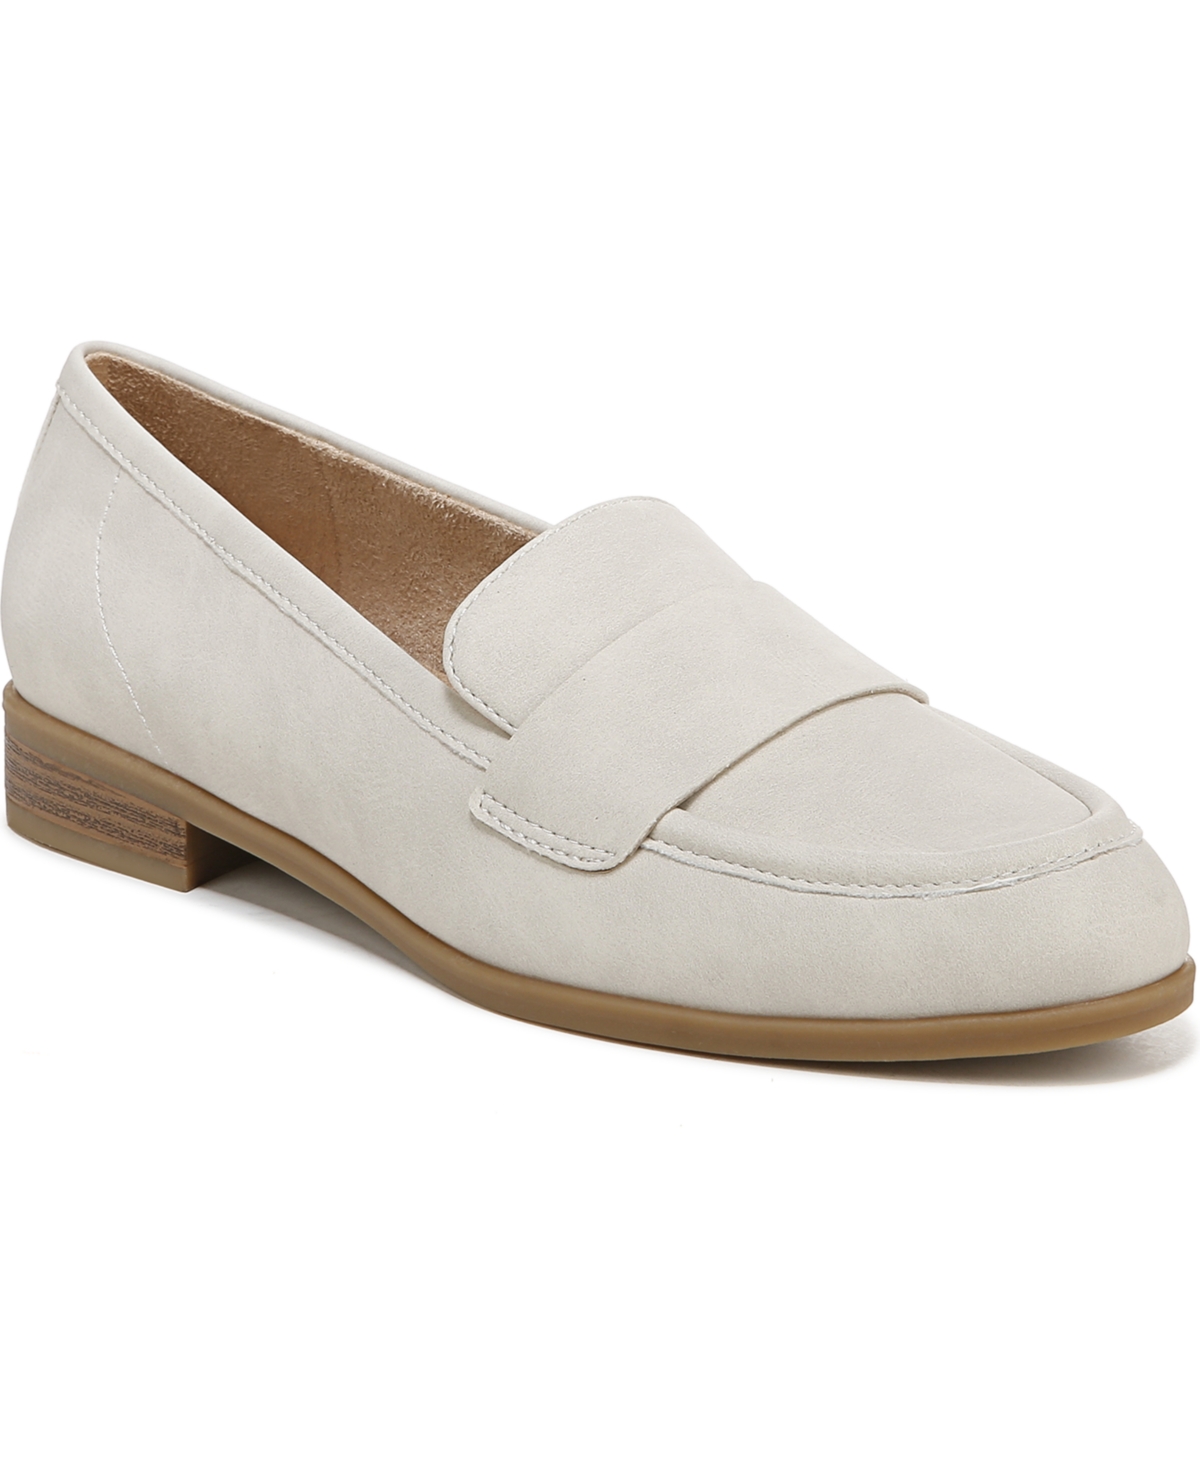 Women's Rate Moc Slip-ons - Tofu Faux Leather